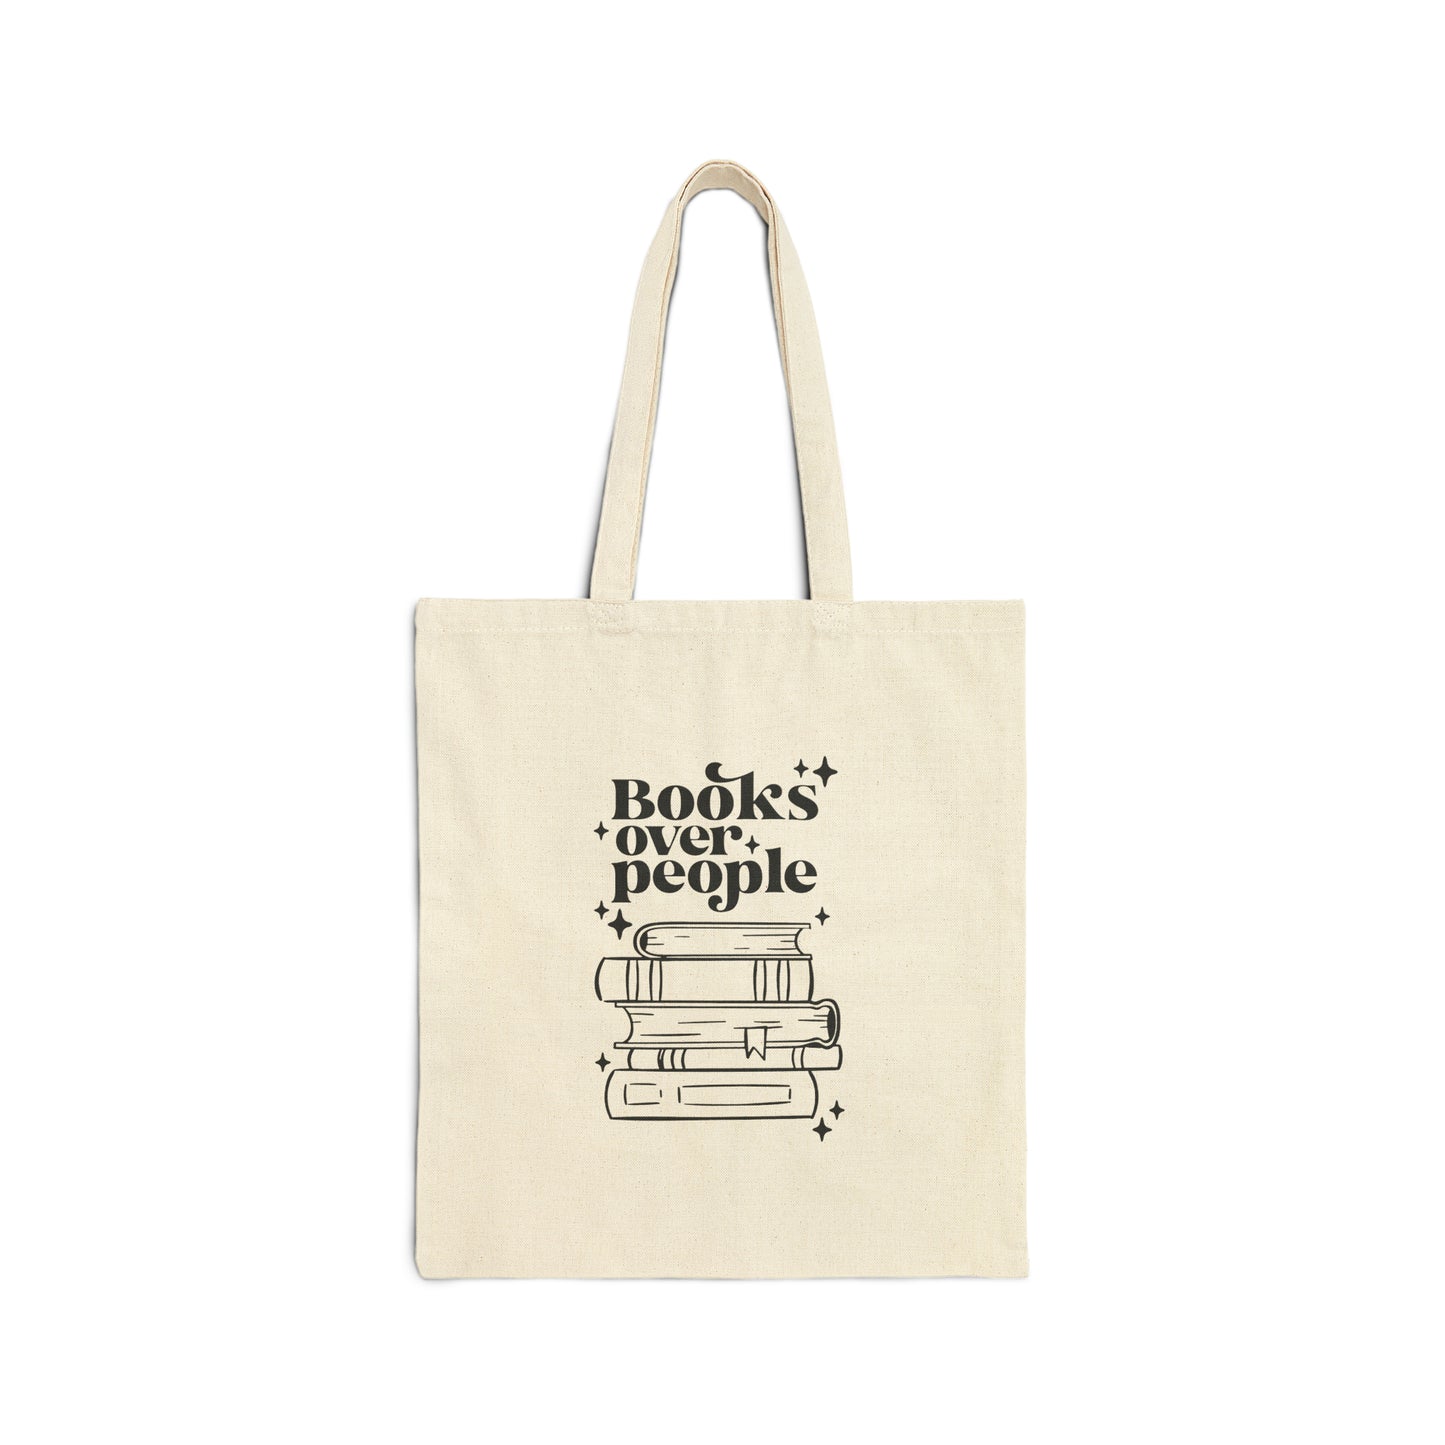 Books Over People Canvas Tote Bag